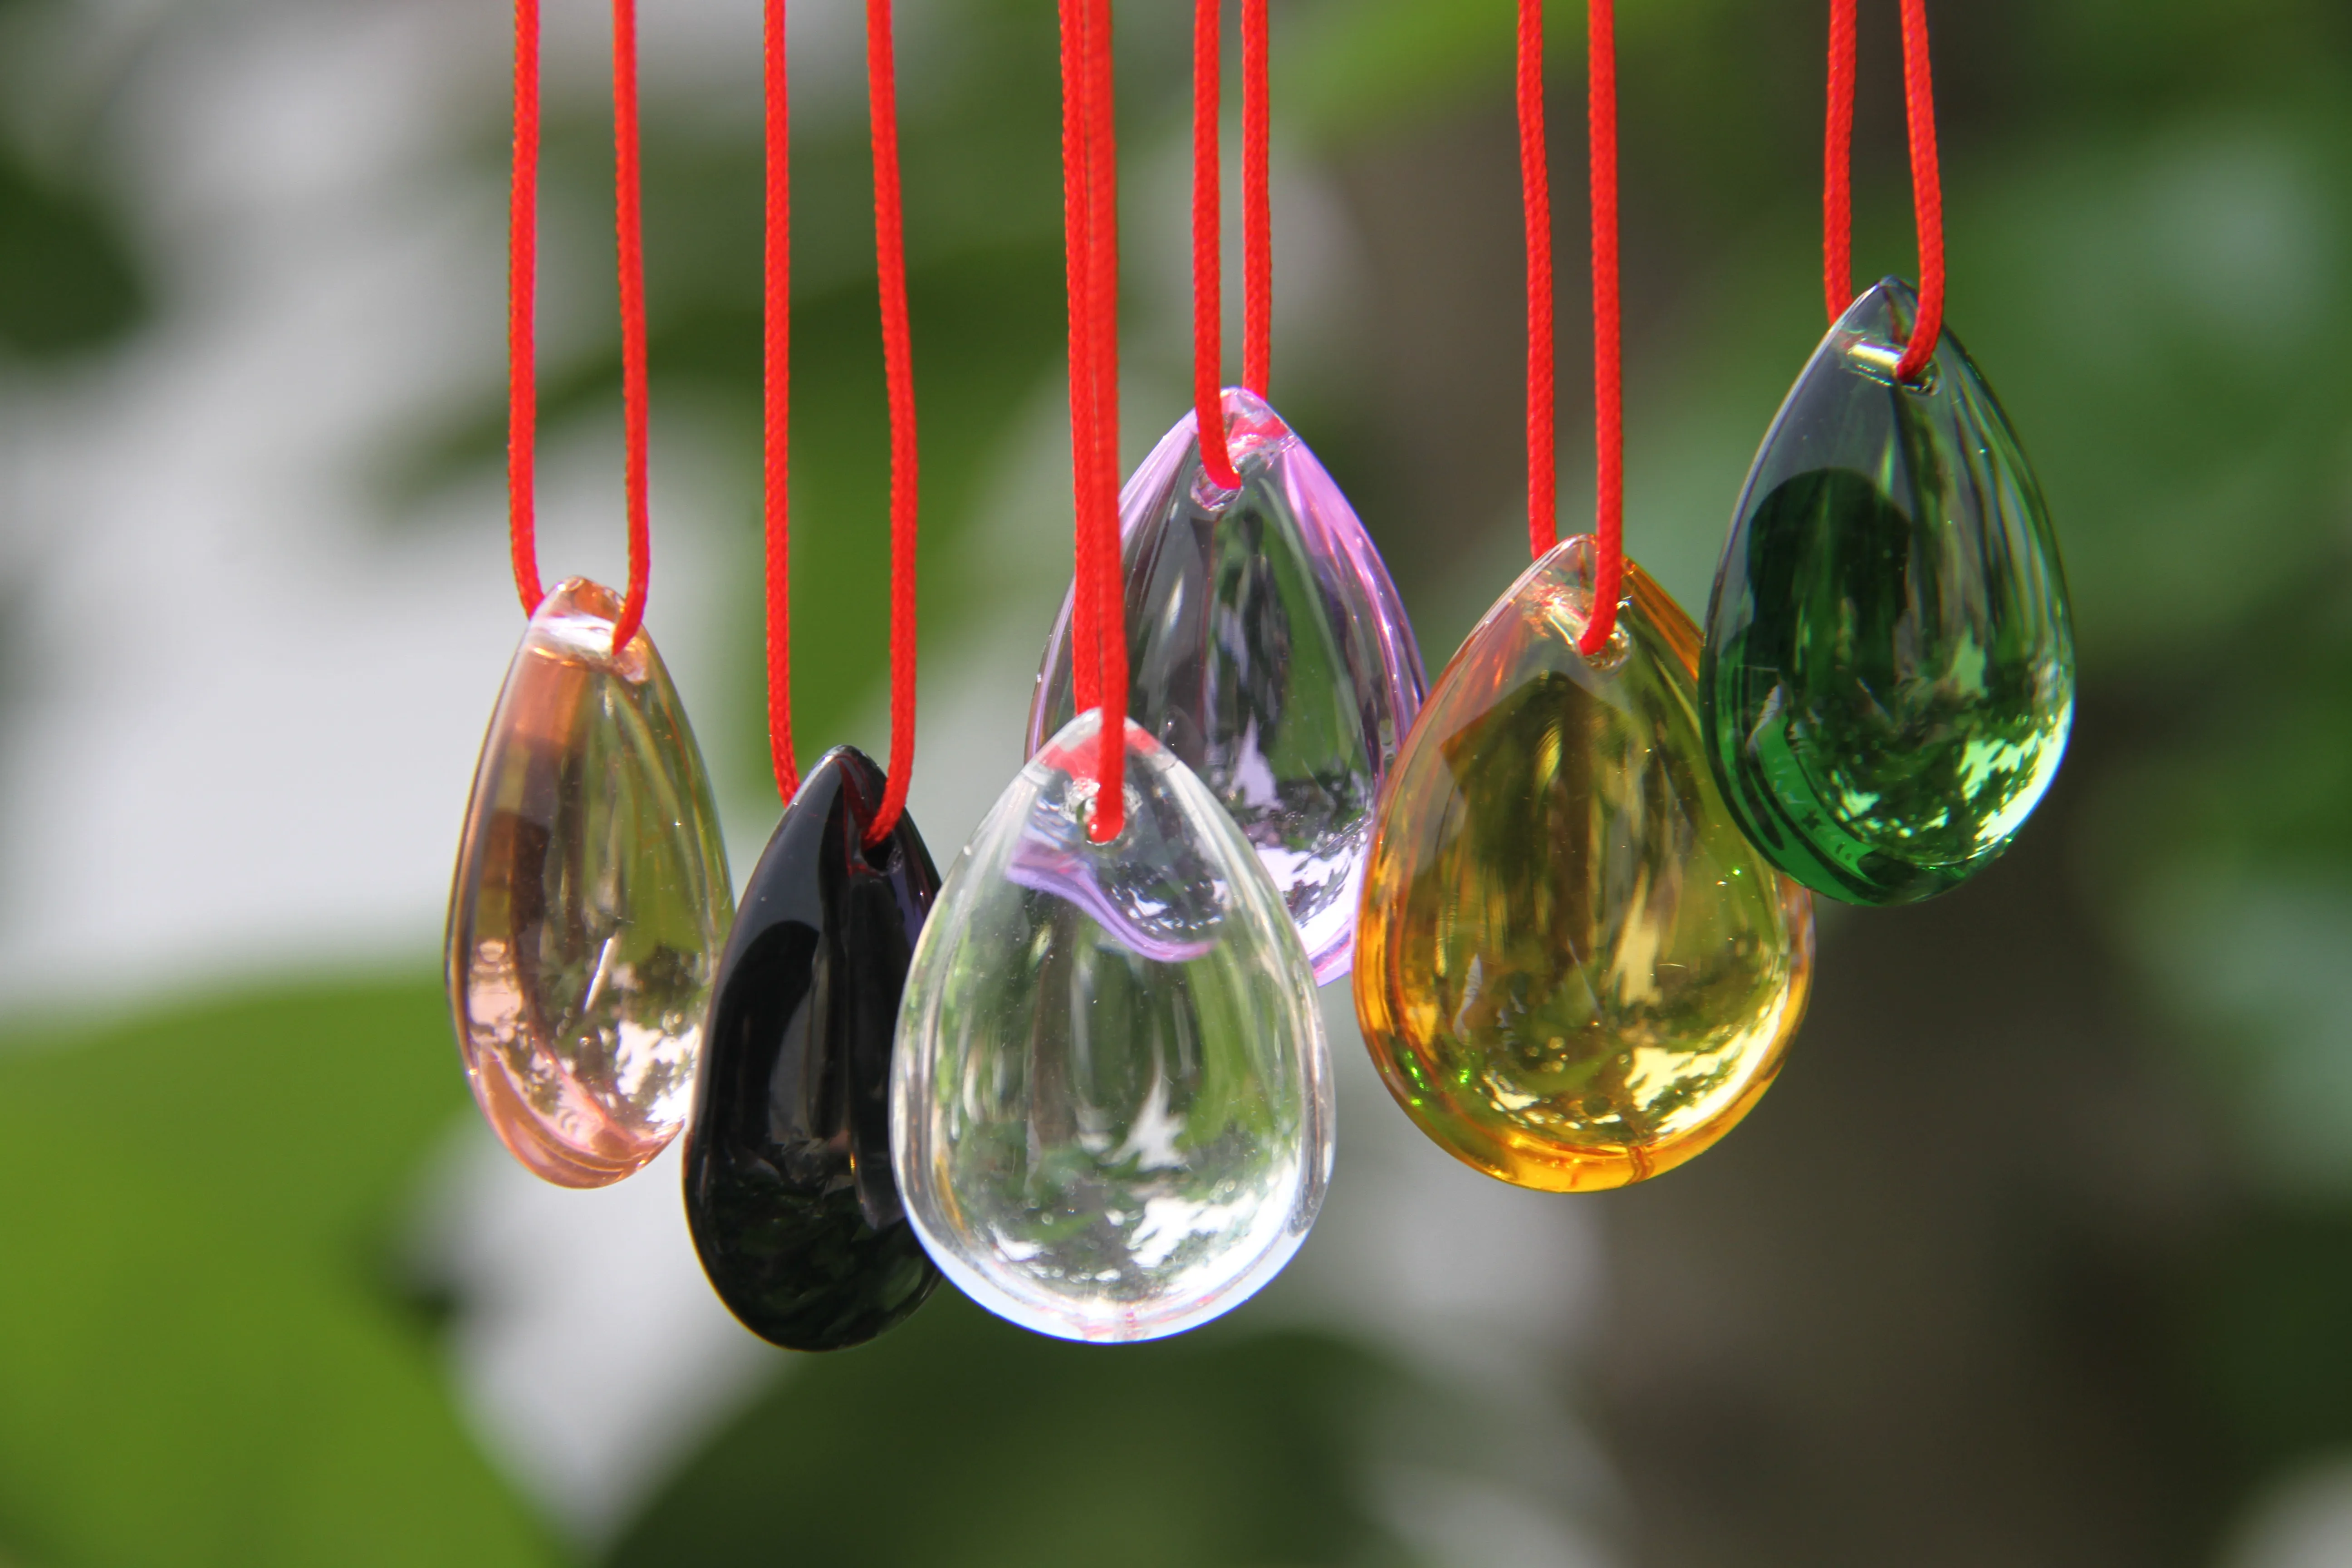 Colors 22mm Crystal Smooth Beads Glass Tear Drop Pendant with Red Strand For Suncatcher Necklace Fenshui Home Marrige Decoration торшер ambiente alicante 8888f 4 ab tear drop